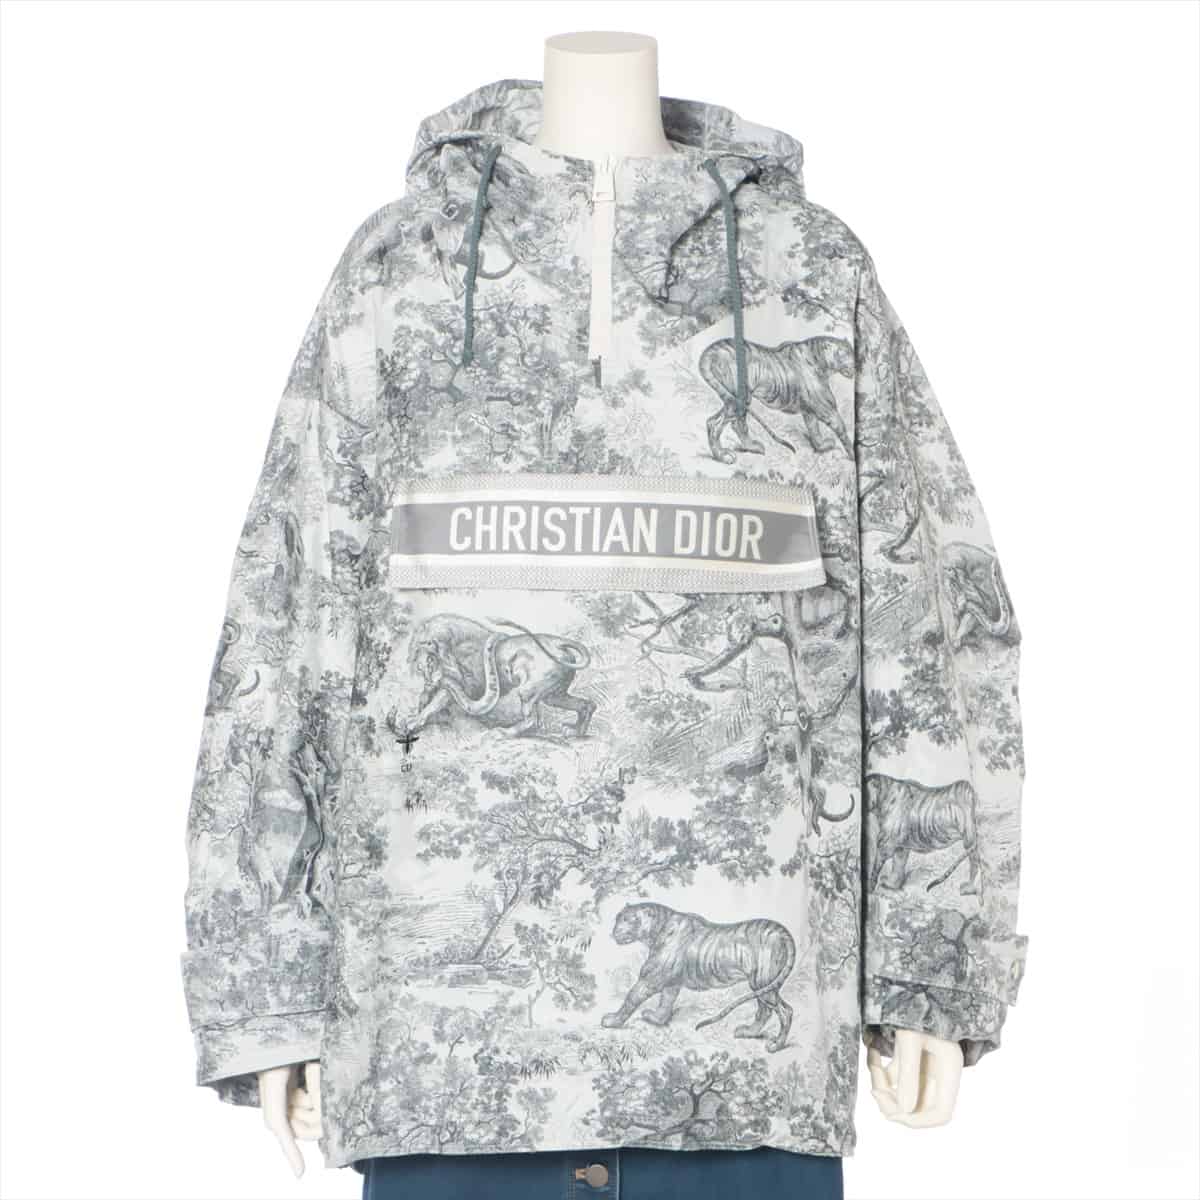 Christian Dior Polyester Jacket XS Ladies' Grey  Toile Doo JUY technical taffeta Jacquard BEE embroidery Anorak